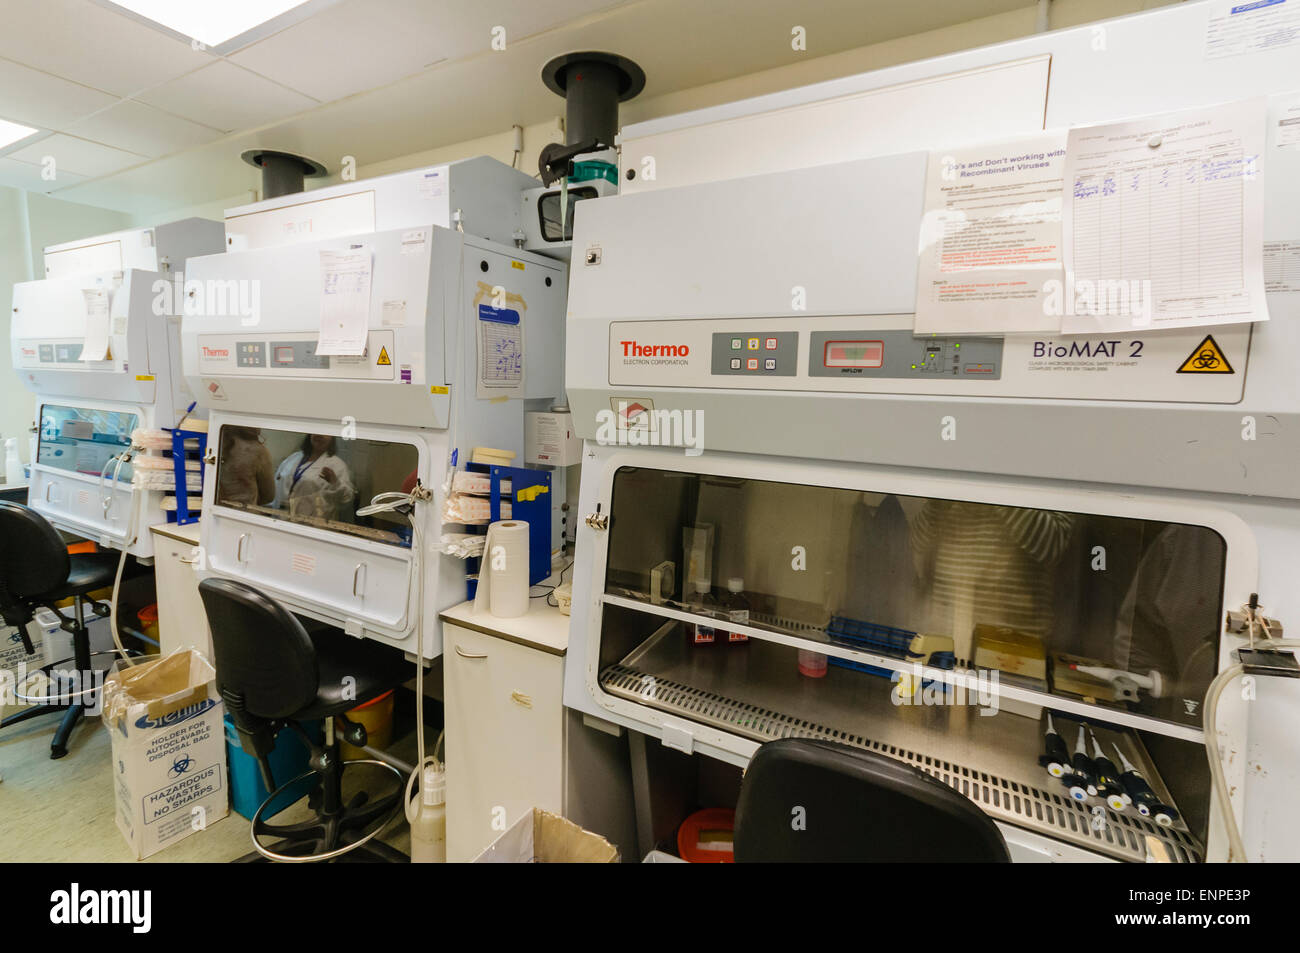 Thermo Electron Corporation BioMat 2 microbiological safety cabinets in a research laboratory. Stock Photo